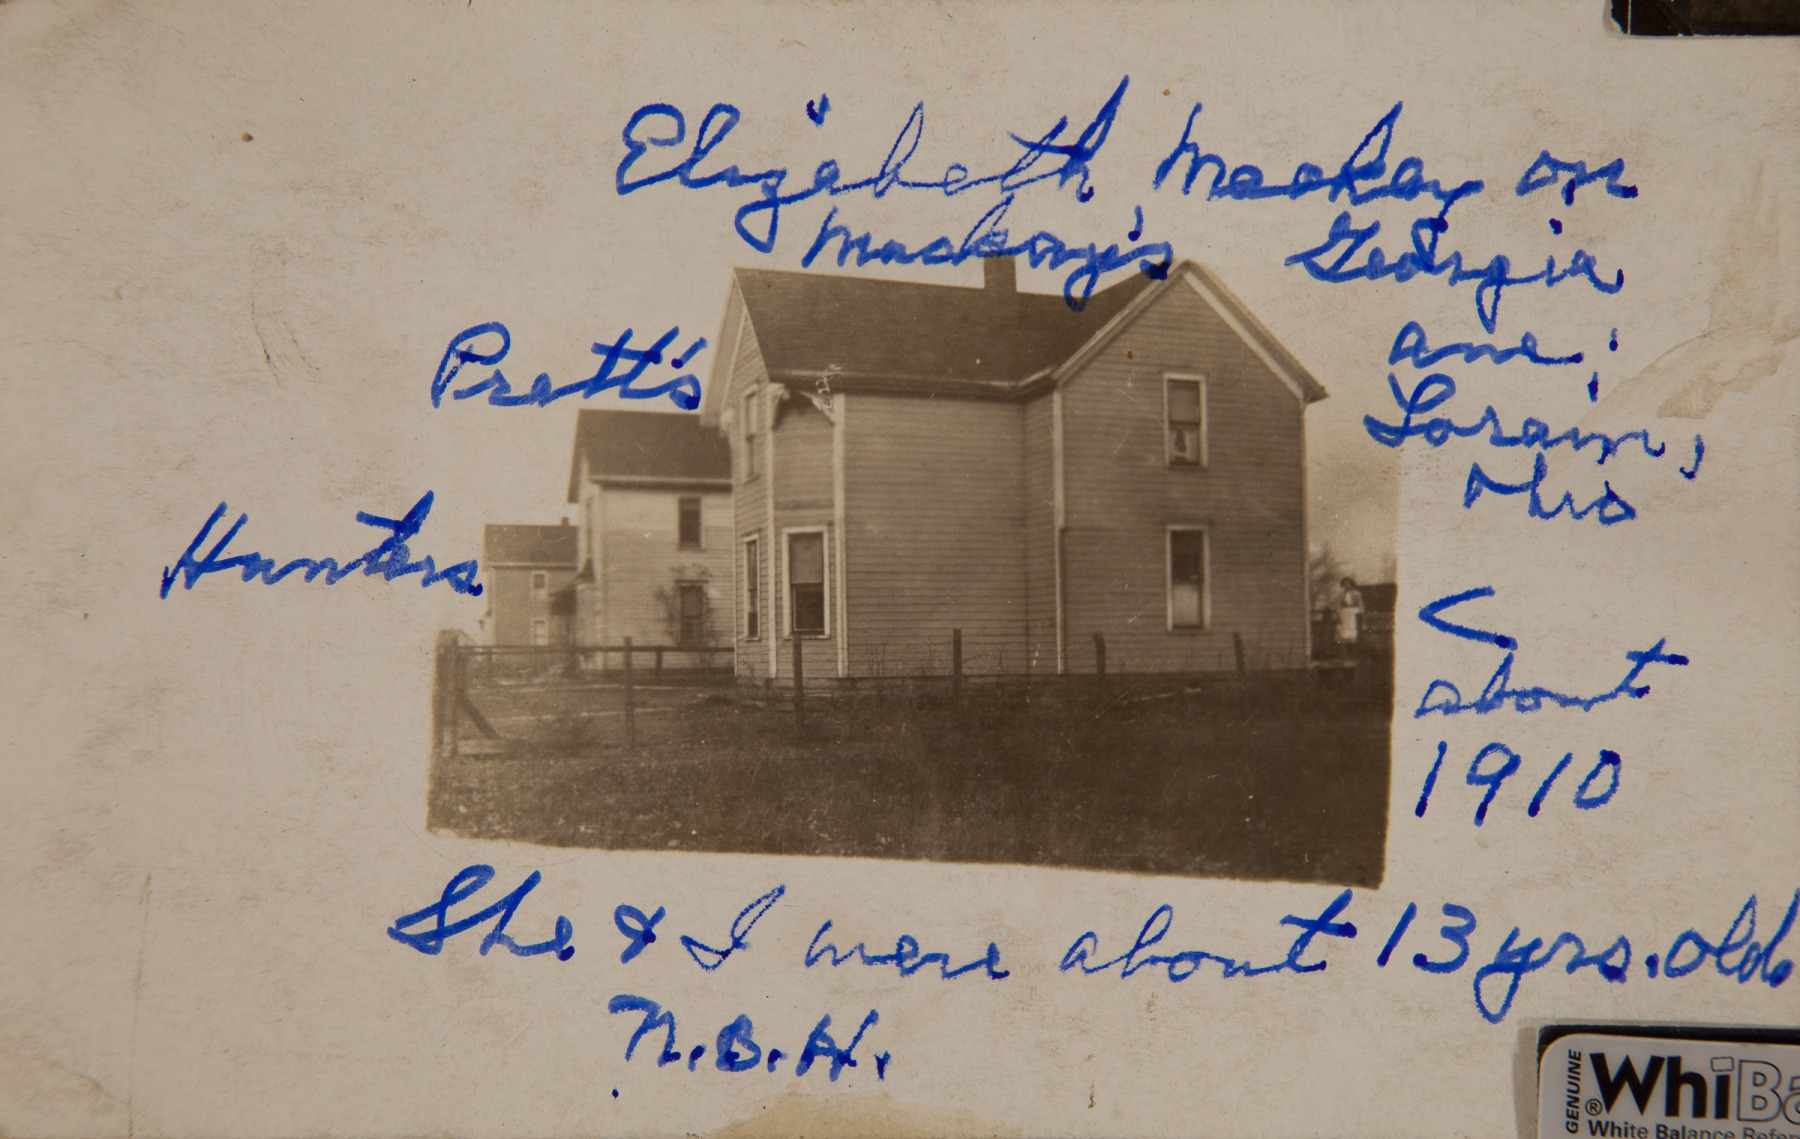 1910, Elizabeth Mackey [to the right of house], Georgia ave, Lorain Ohio, She & I [Nellie B Harnish] we about 13 yrs. old.[second house is the "Pratt's" and third is the Hunters"